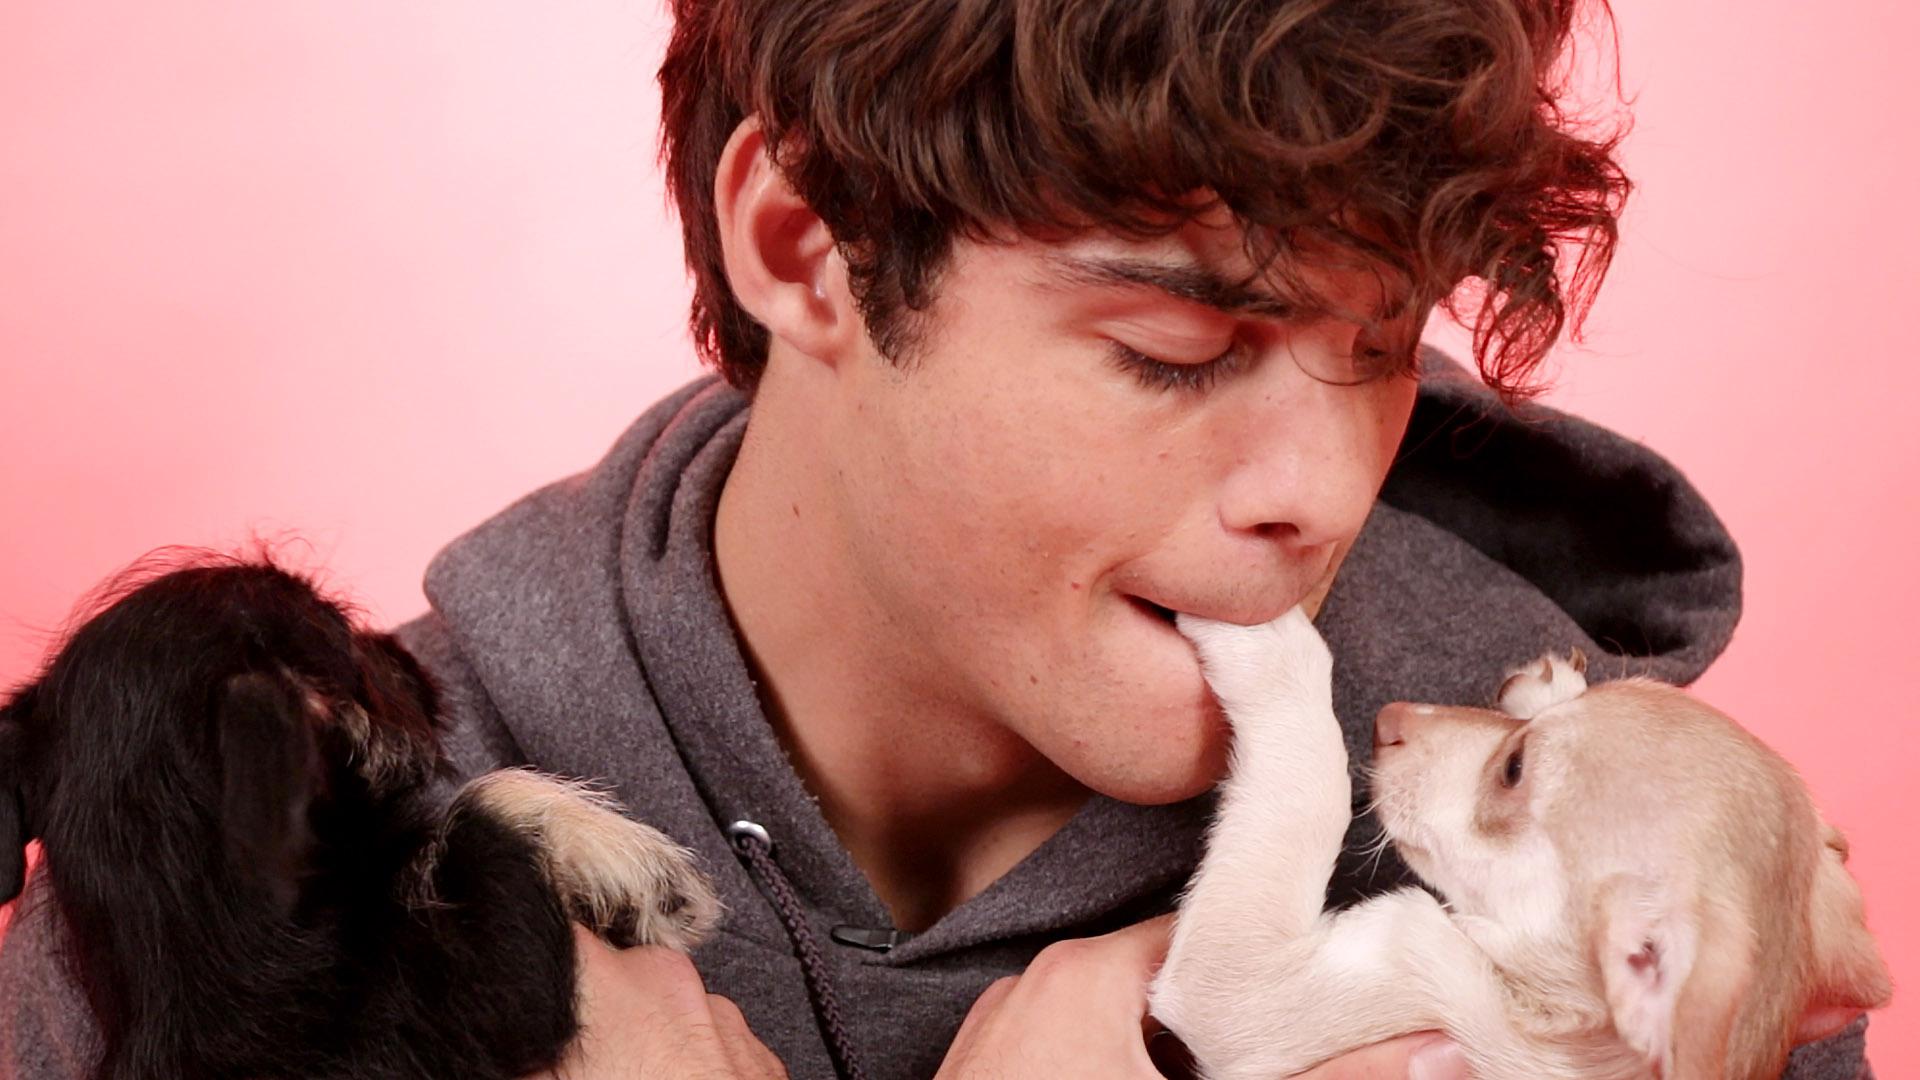 Noah Centineo Plays With Puppies While Answering Fan Questions.